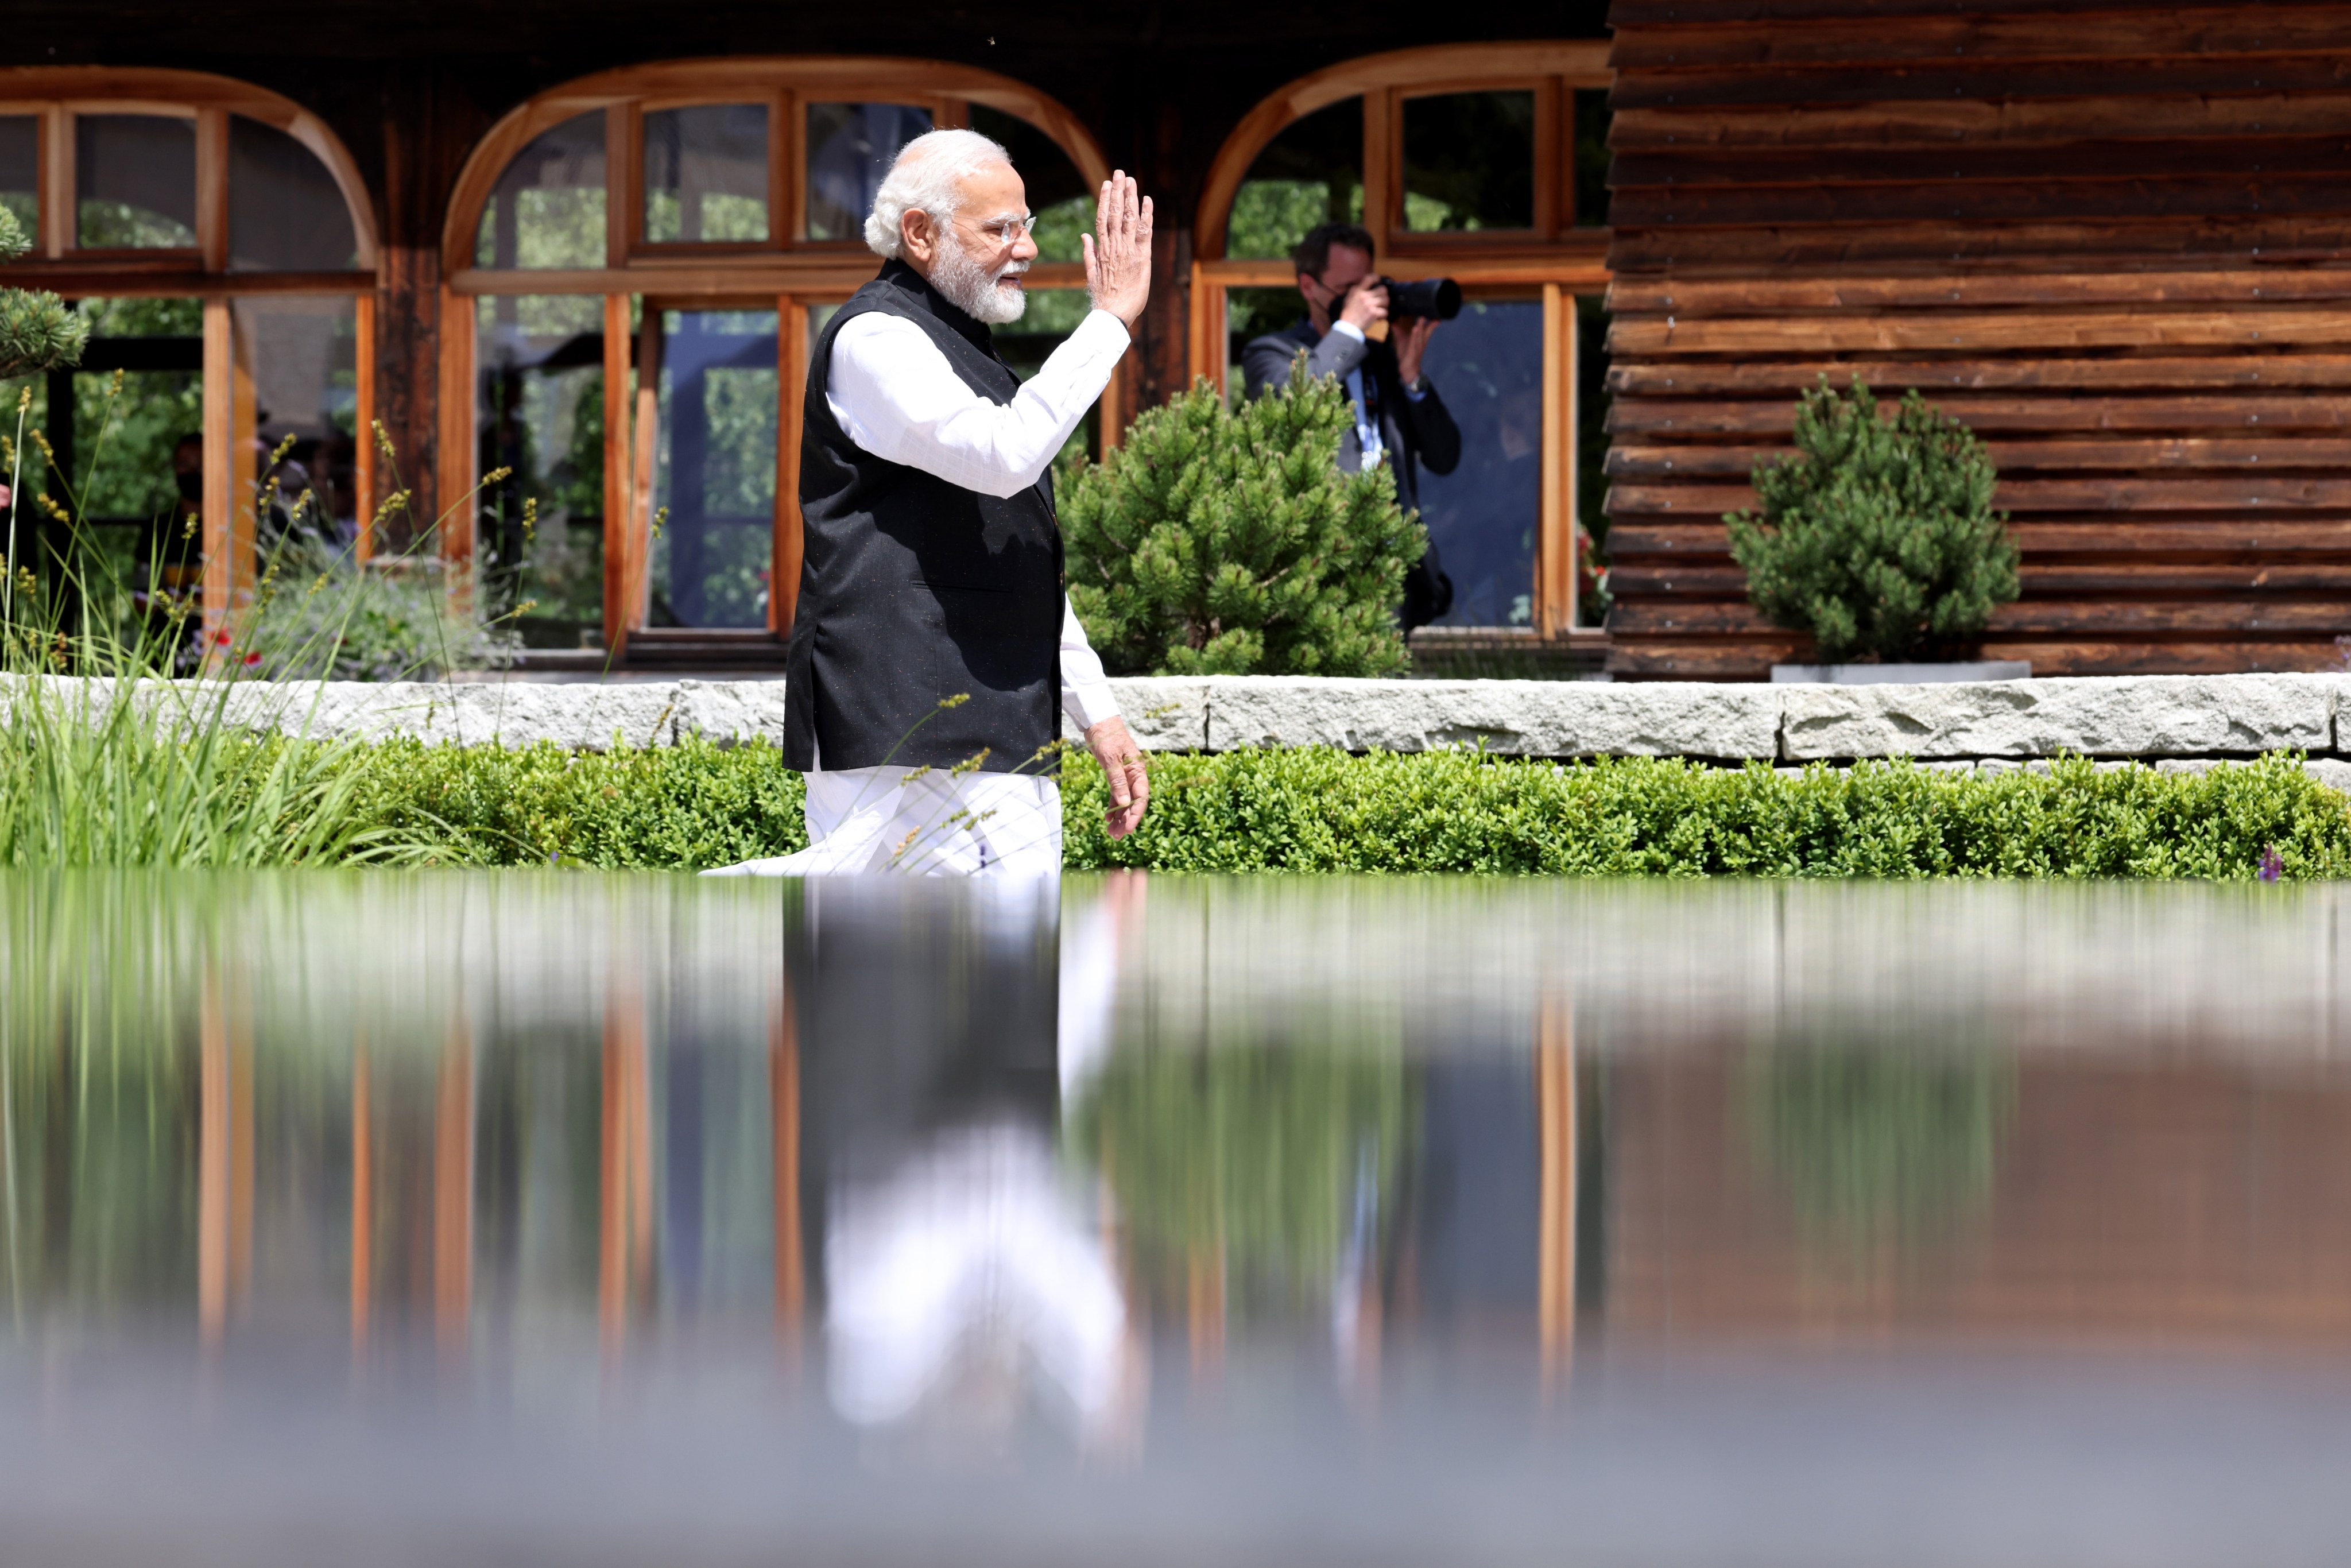 Indian Prime Minister Narendra Modi arrives at the Group of Seven leaders summit in Elmau, Germany, on June 27. Photo: Bloomberg